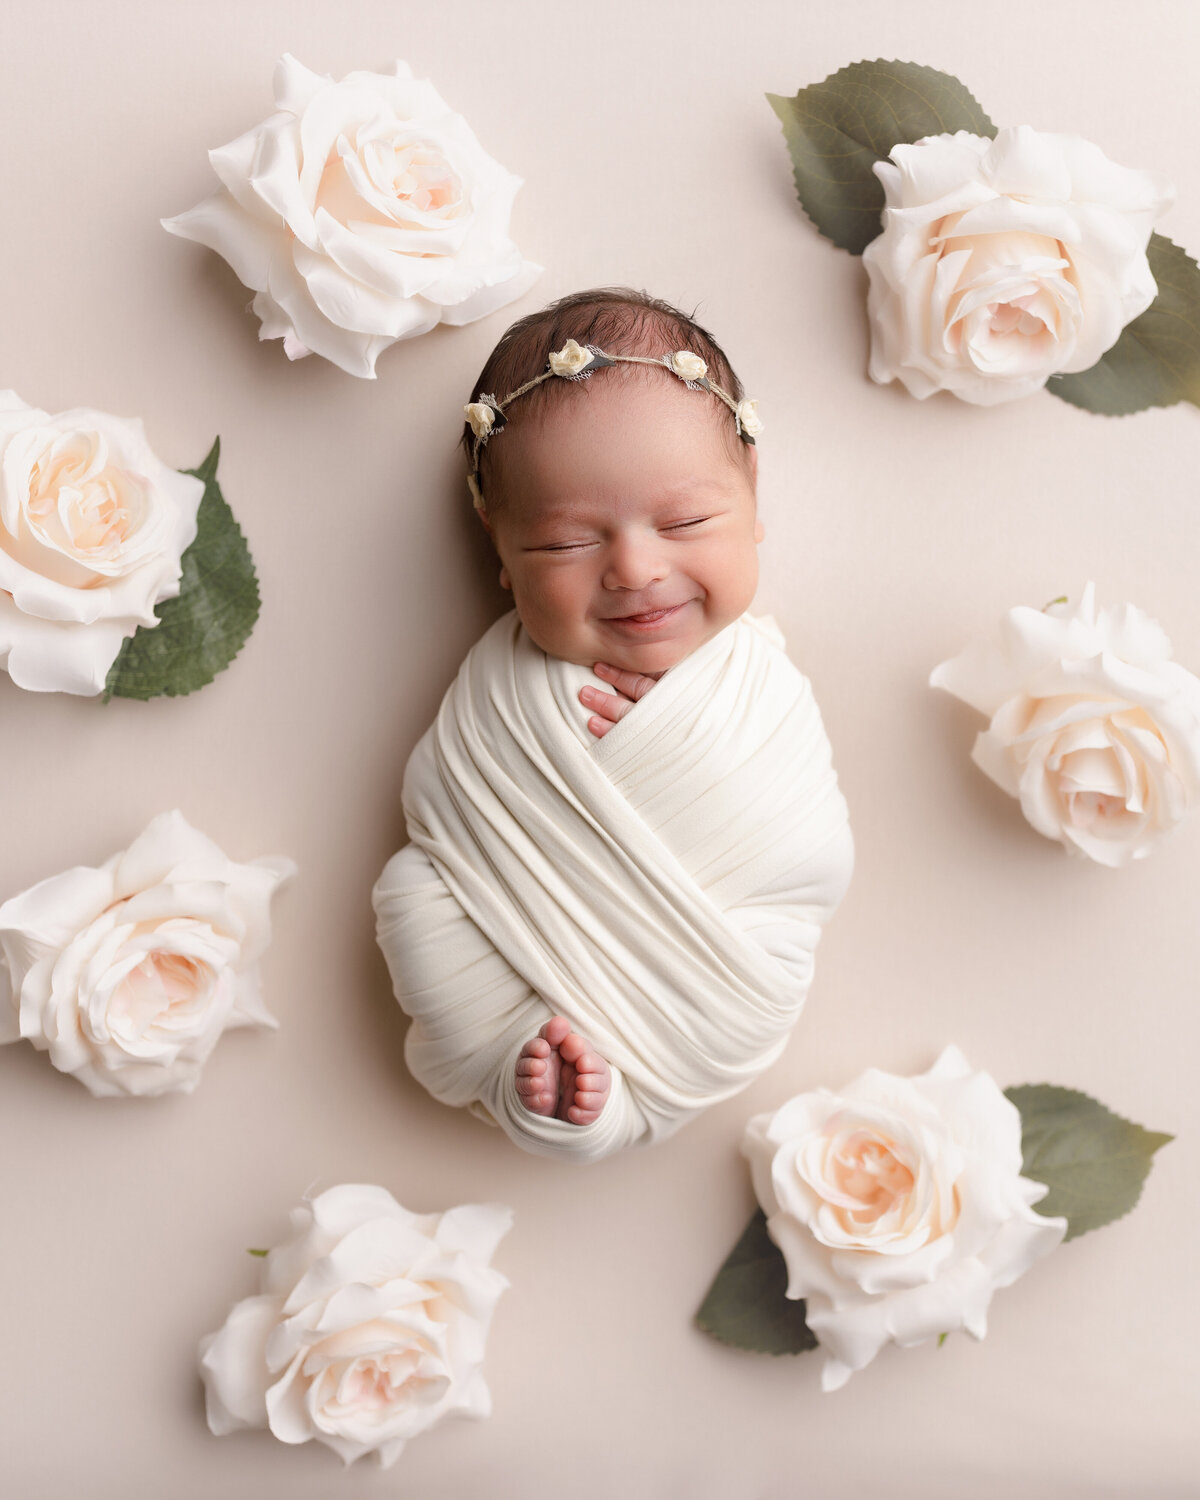 Newborn photoshoot in West Palm Beach Florida. Baby is wrapped in a knit swaddle with her toes and fingers peeking out of the wrap. Baby is wearing a delicate floral headband and surrounded by large rose blooms. Baby is sleeping and has a big smile.